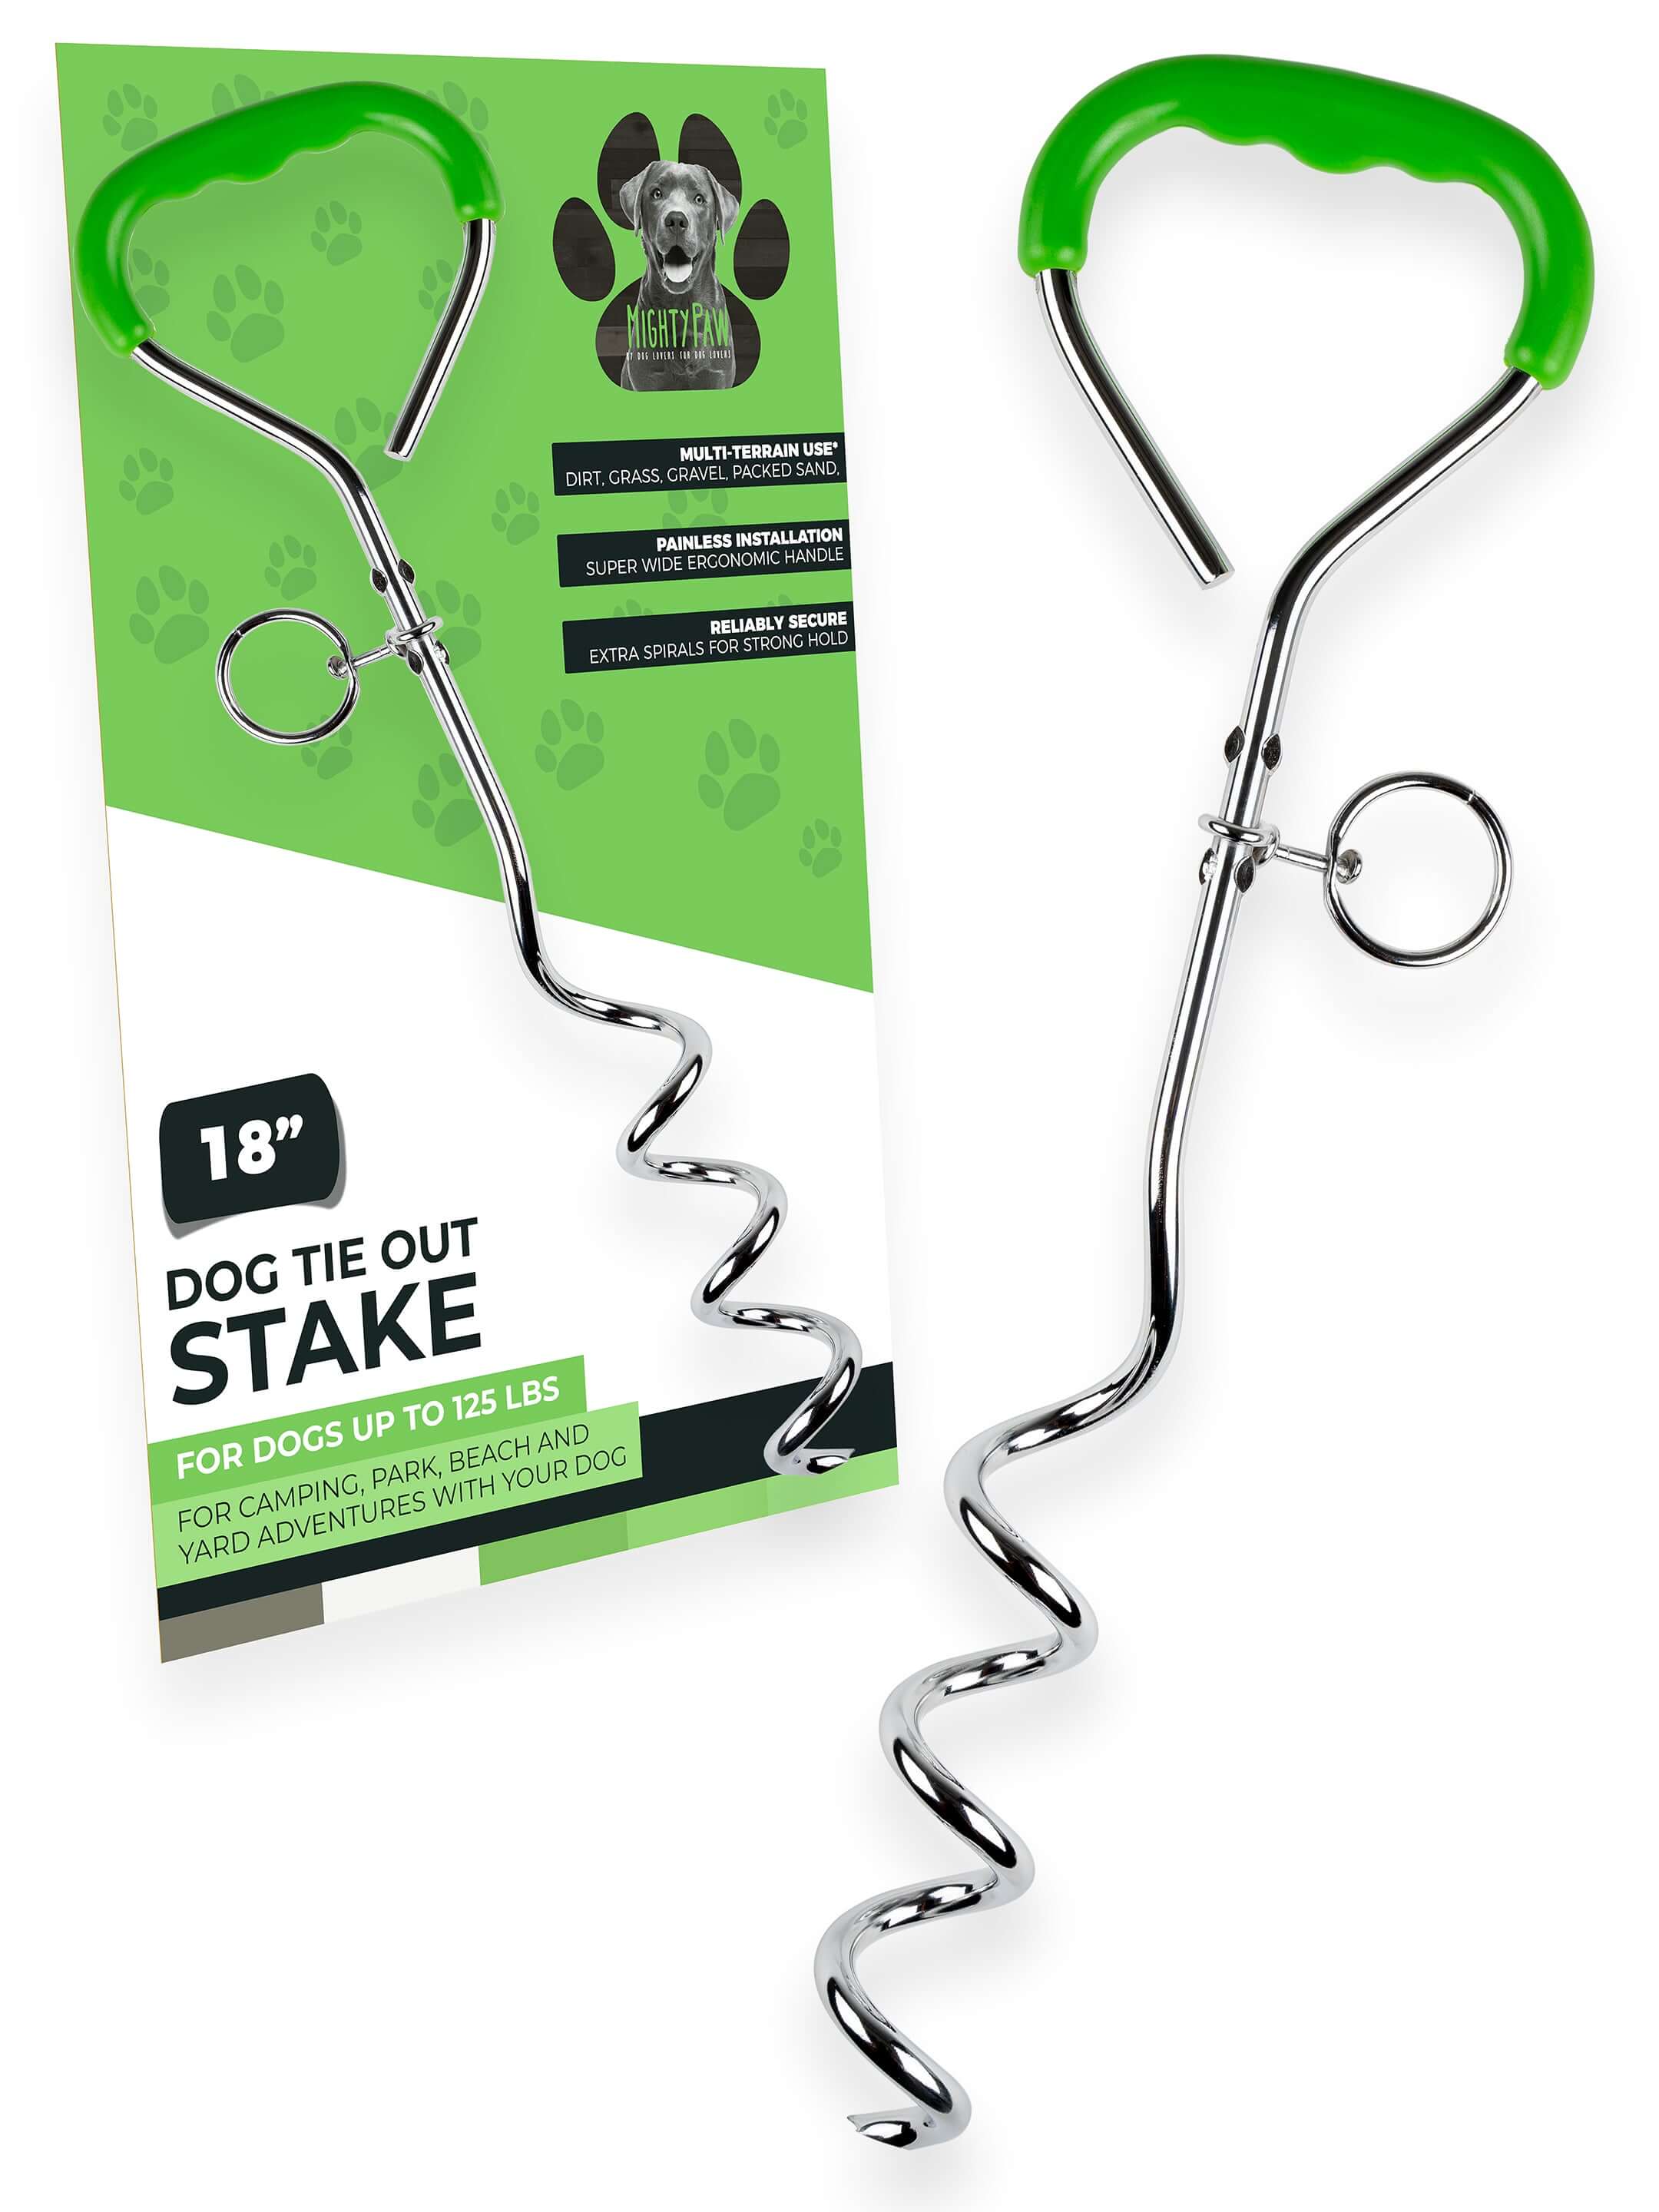 Mighty Paw Dog Tie Out Stake